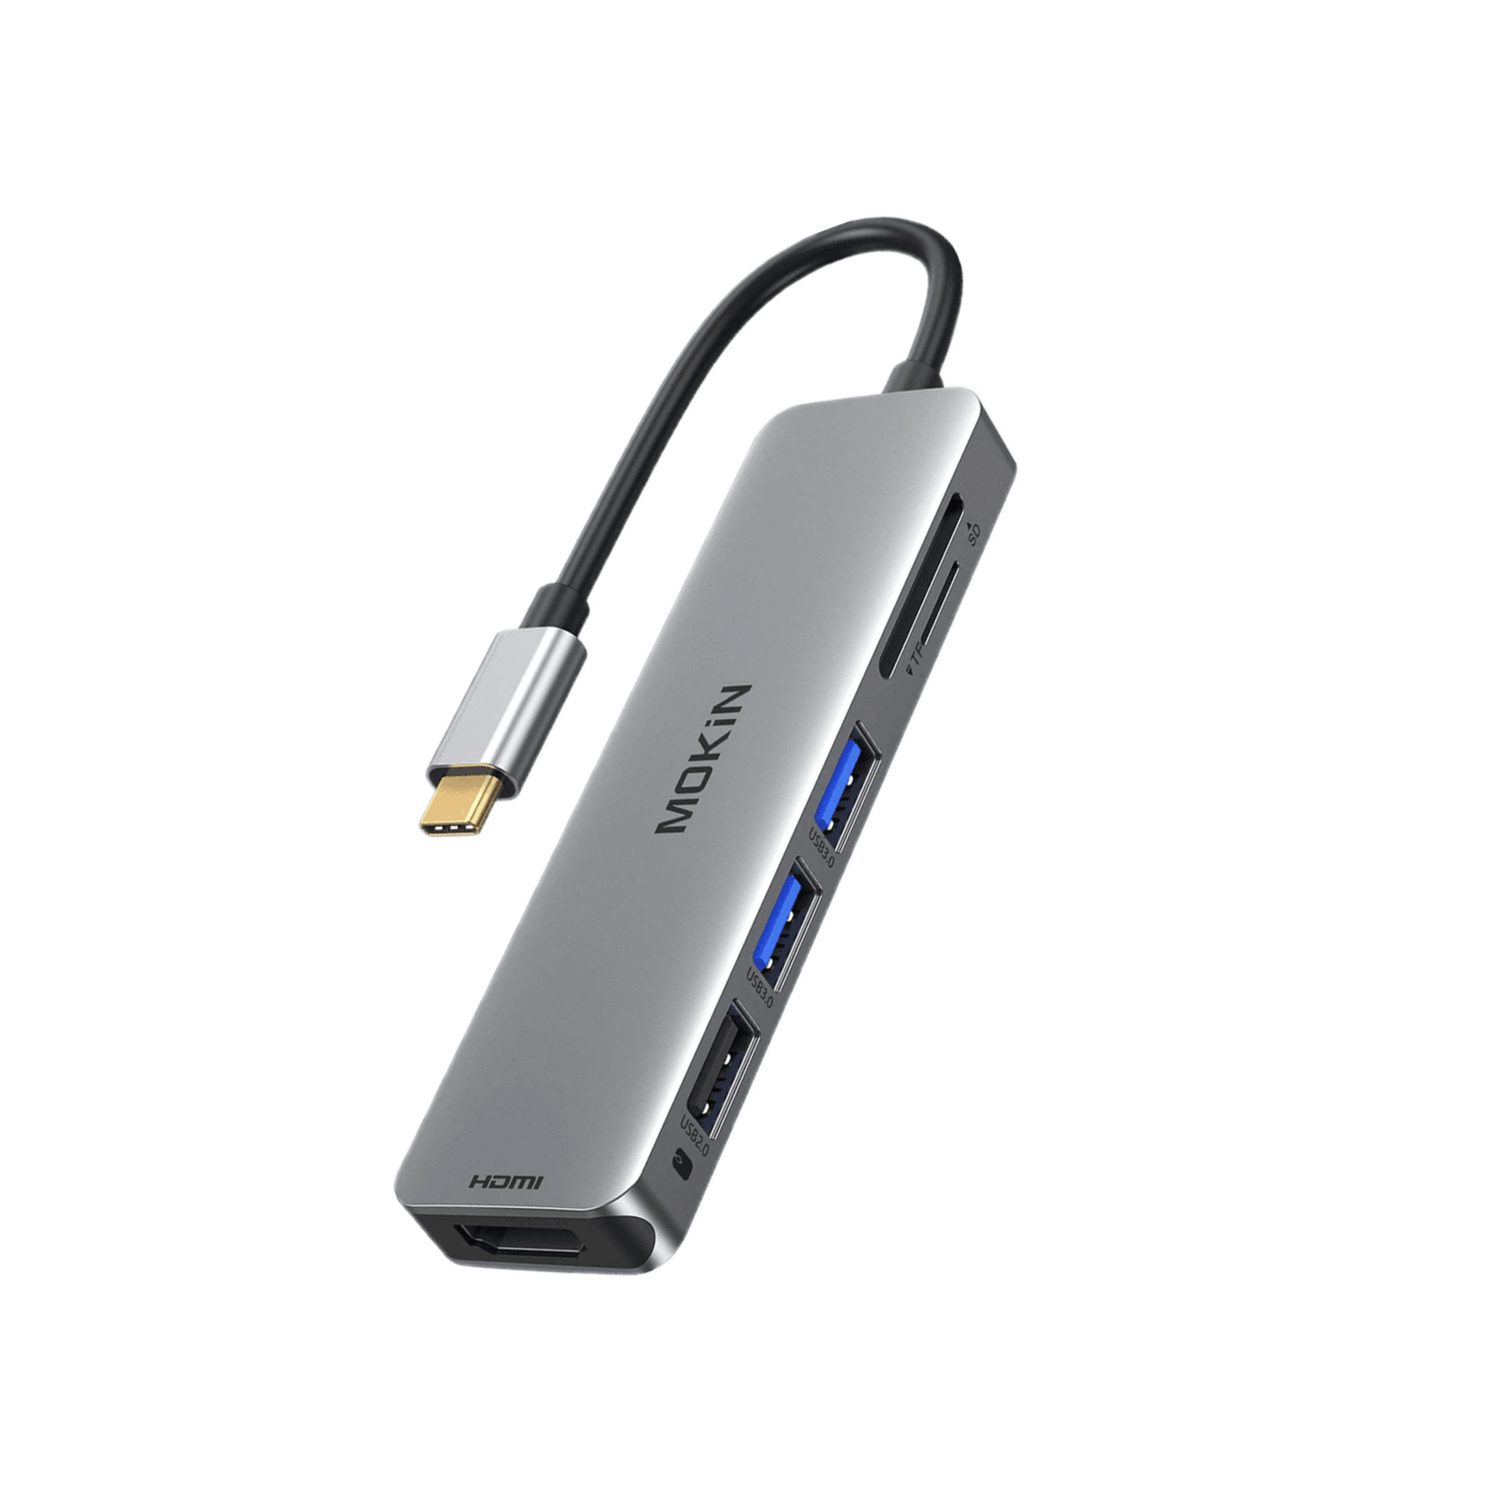 Mokin 7 IN 1 USB C to HDMI Adapter with 4K@60hz